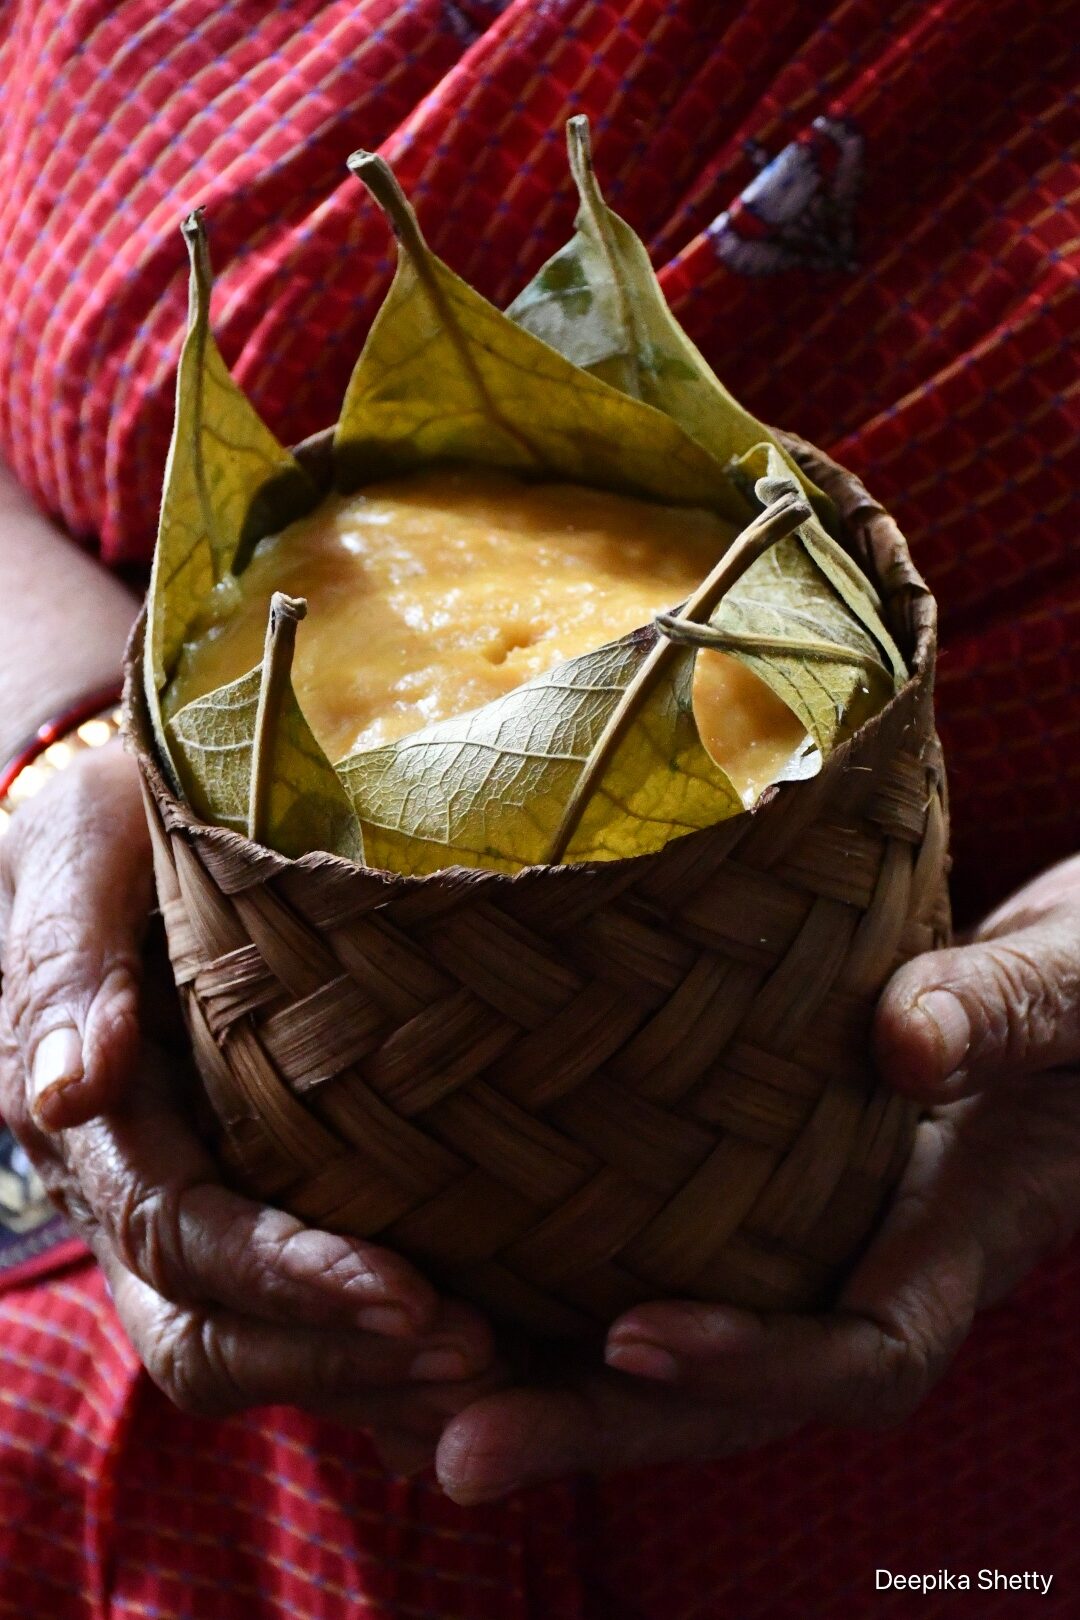 A close up shot of a single yellow jackfruit idli is steamed in leaves and held with two hands.